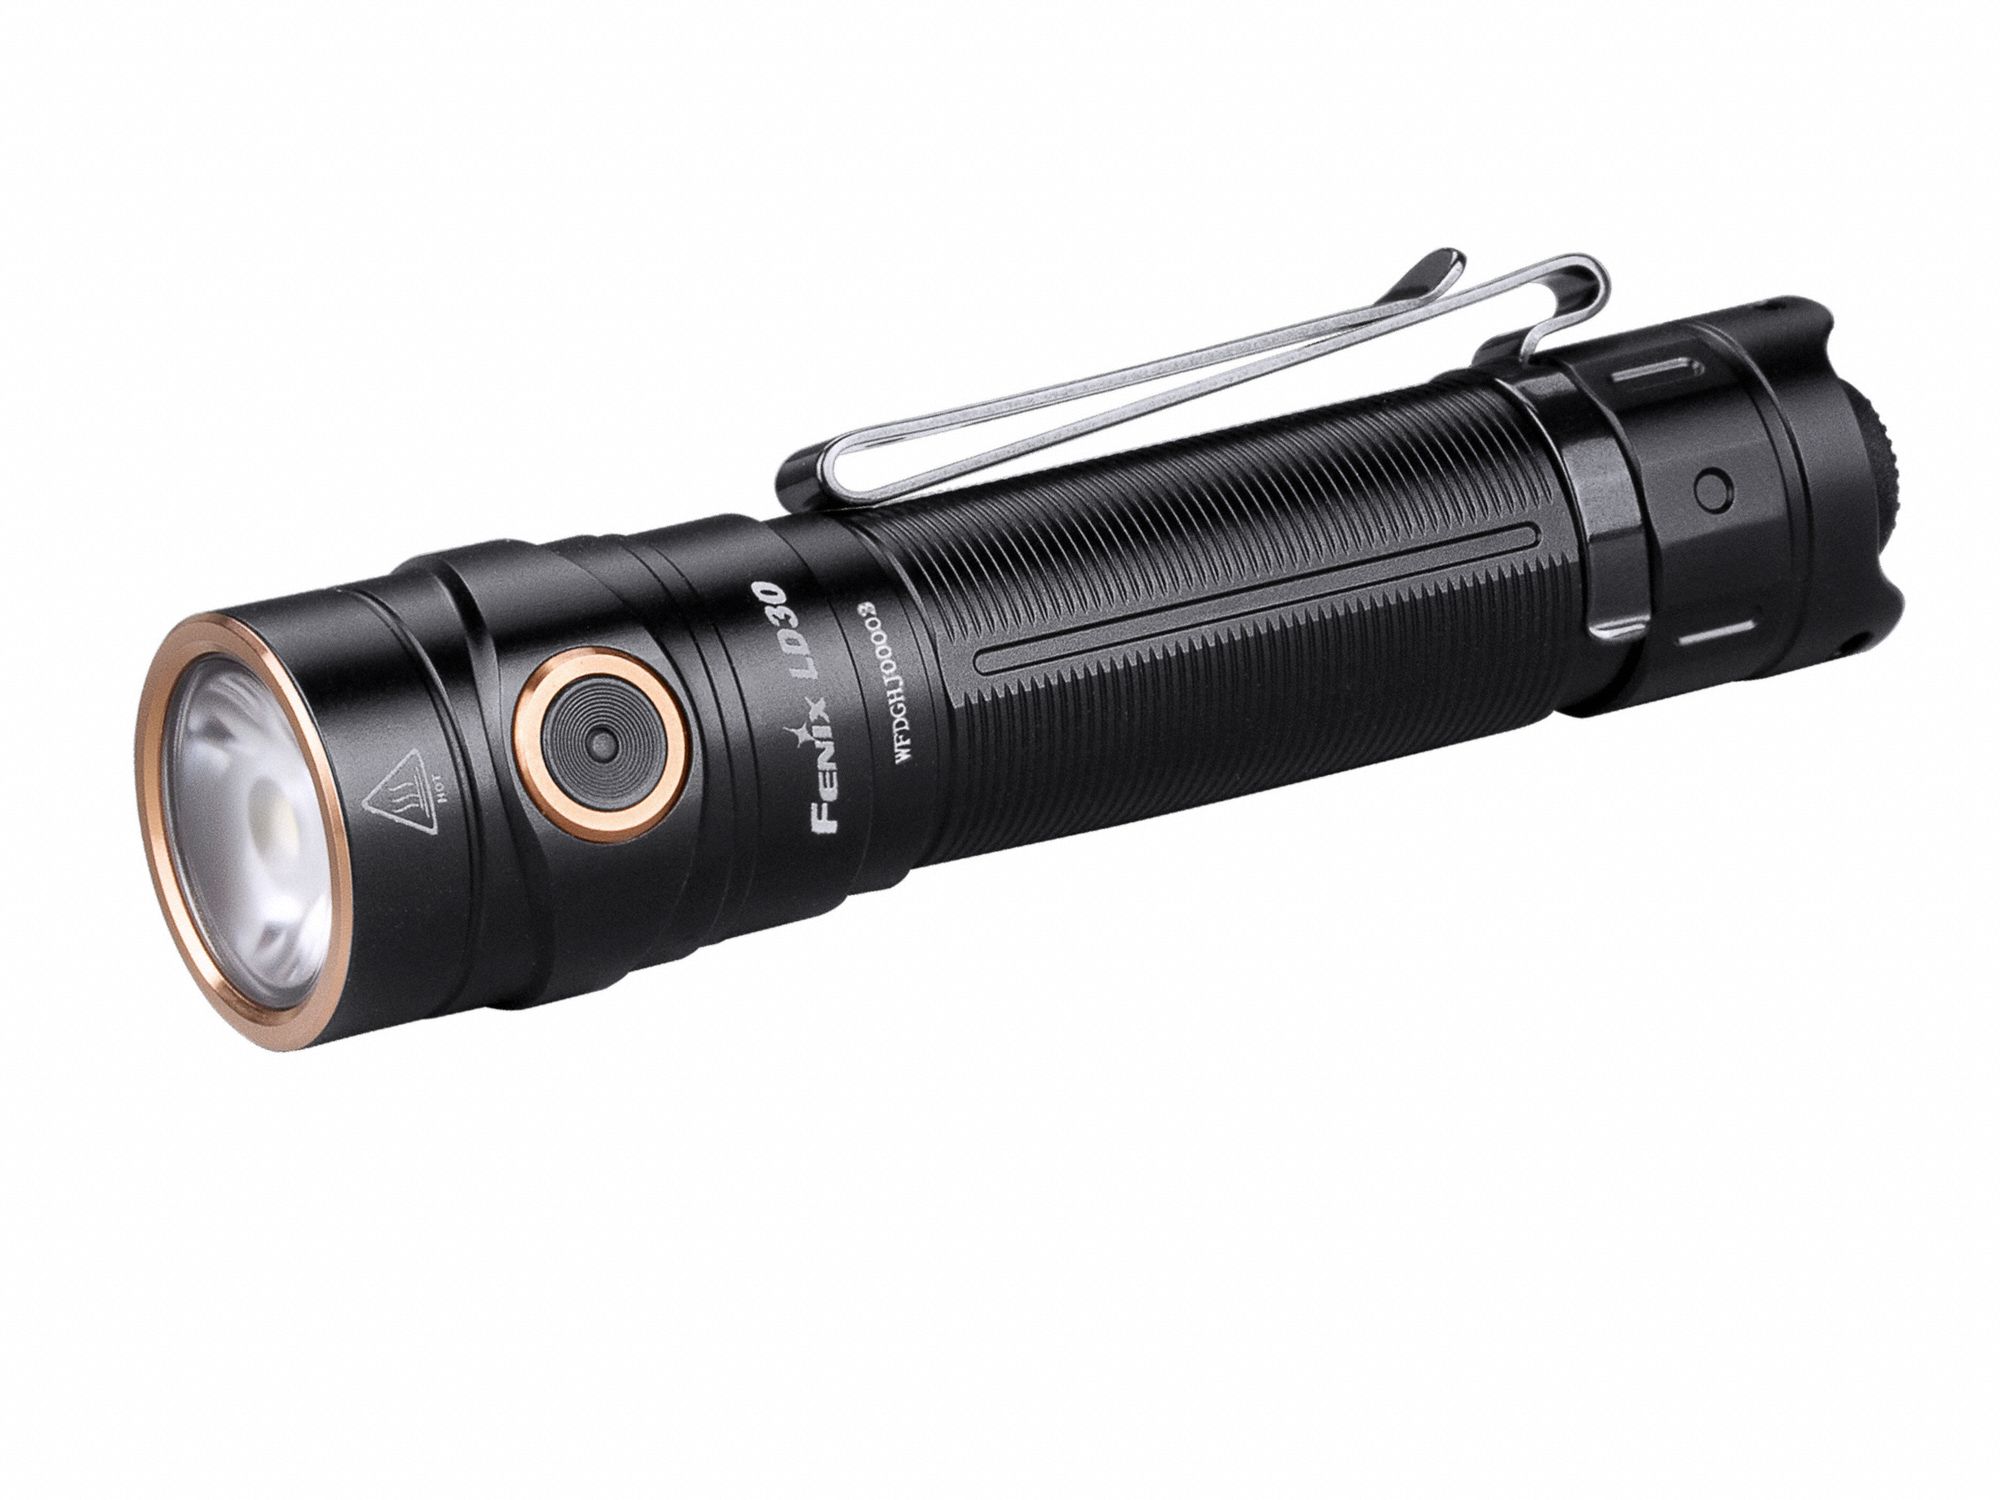 Rechargeable Flashlight: Rechargeable, 1,600 lm Max Brightness, 5 Light Output Levels